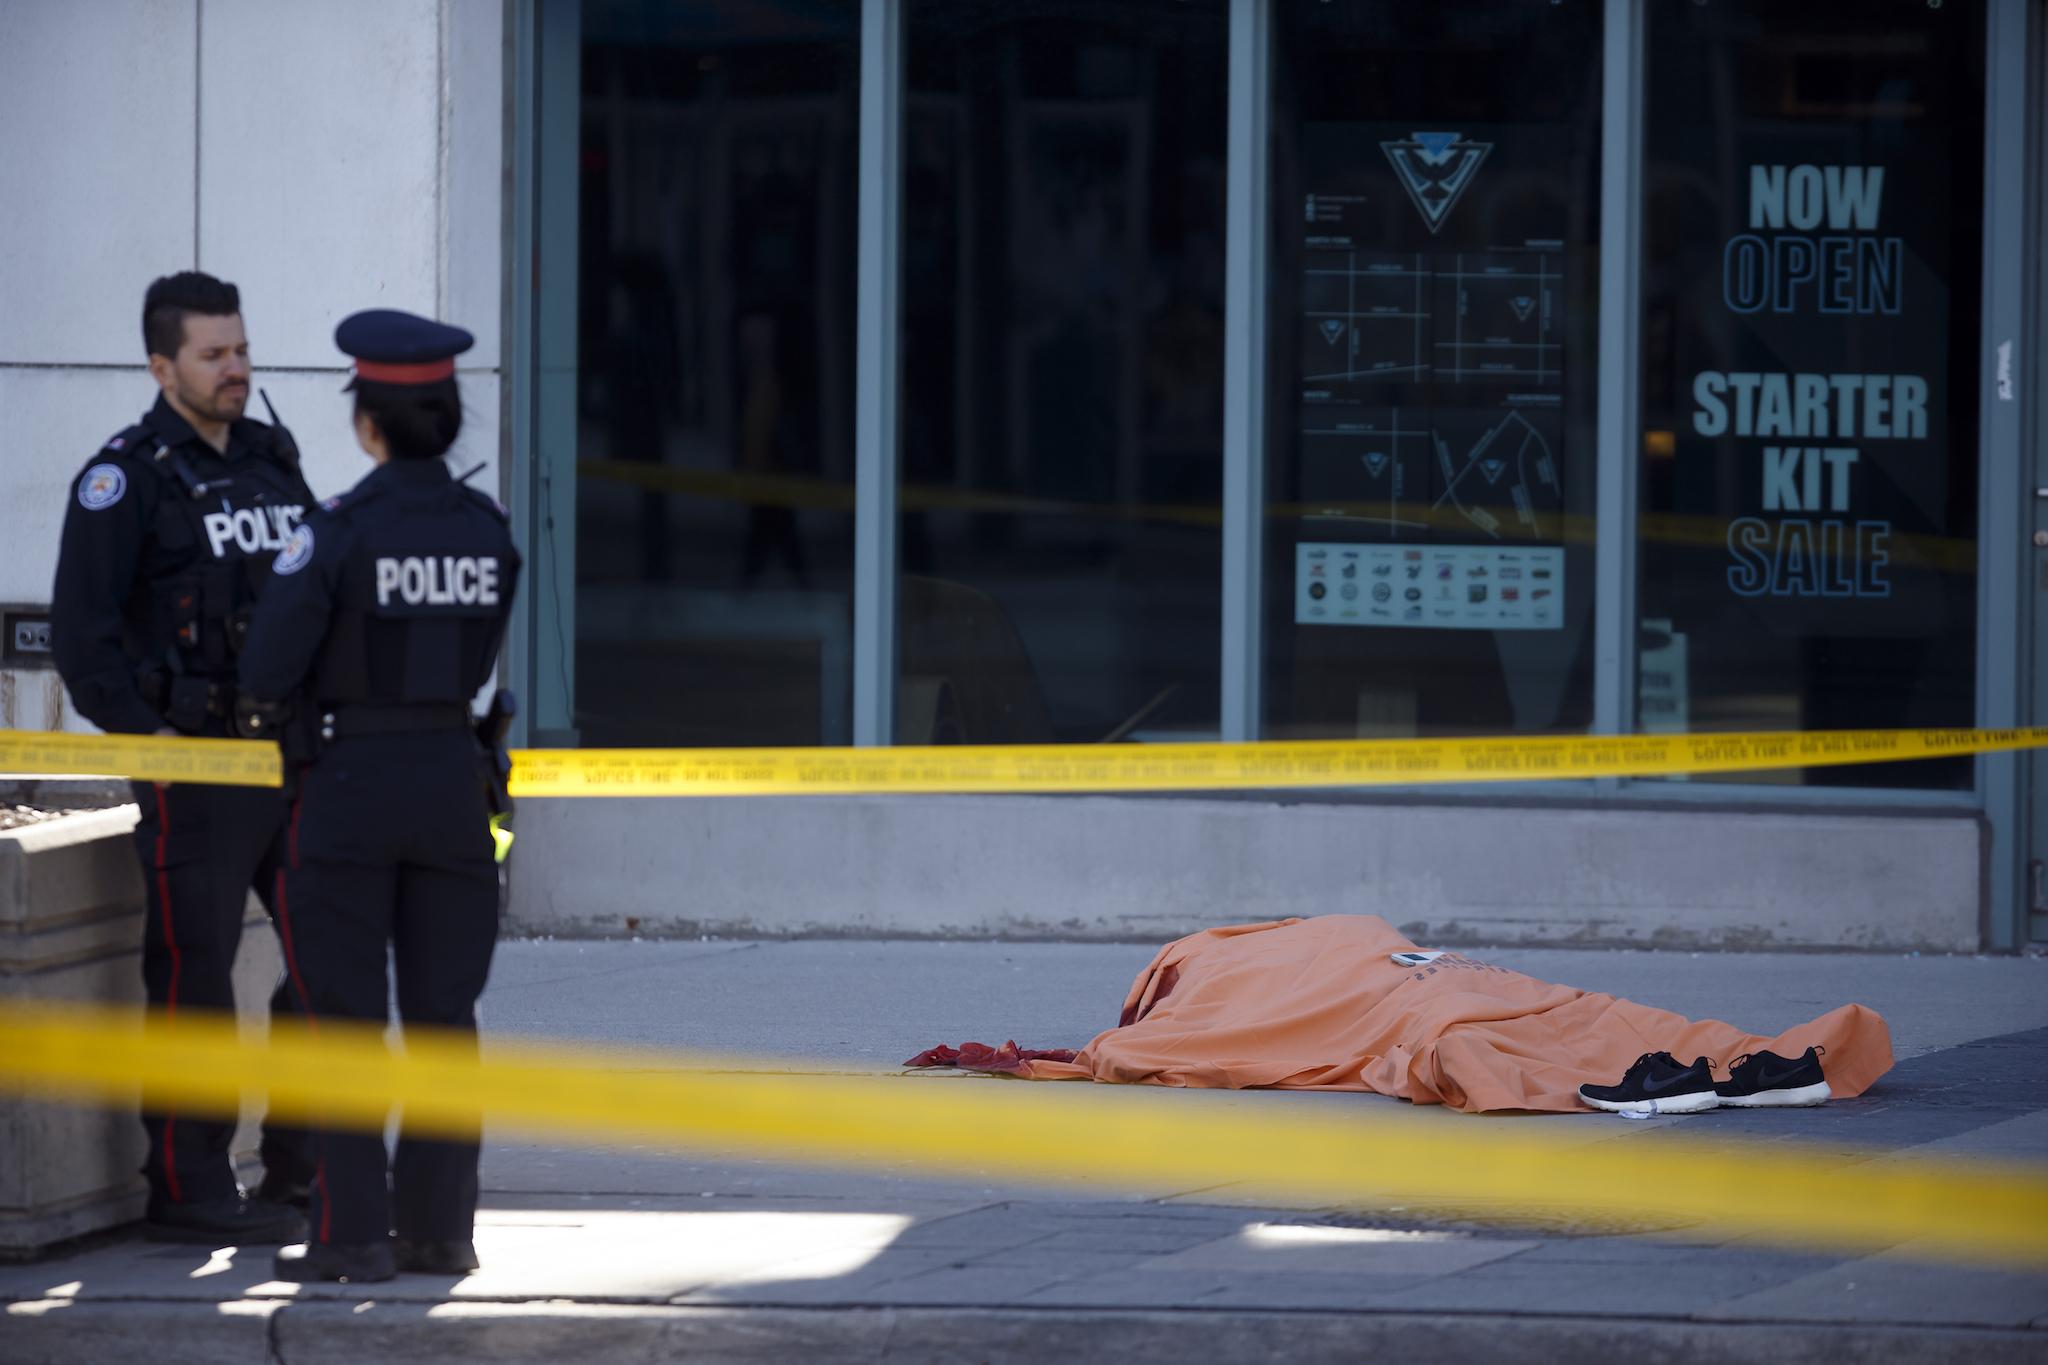 A tarp covers an unidentiified body on Yonge St. at Finch Ave. after a van plowed into pedestrians on April 23, 2018 in Toronto, Ontario, Canada